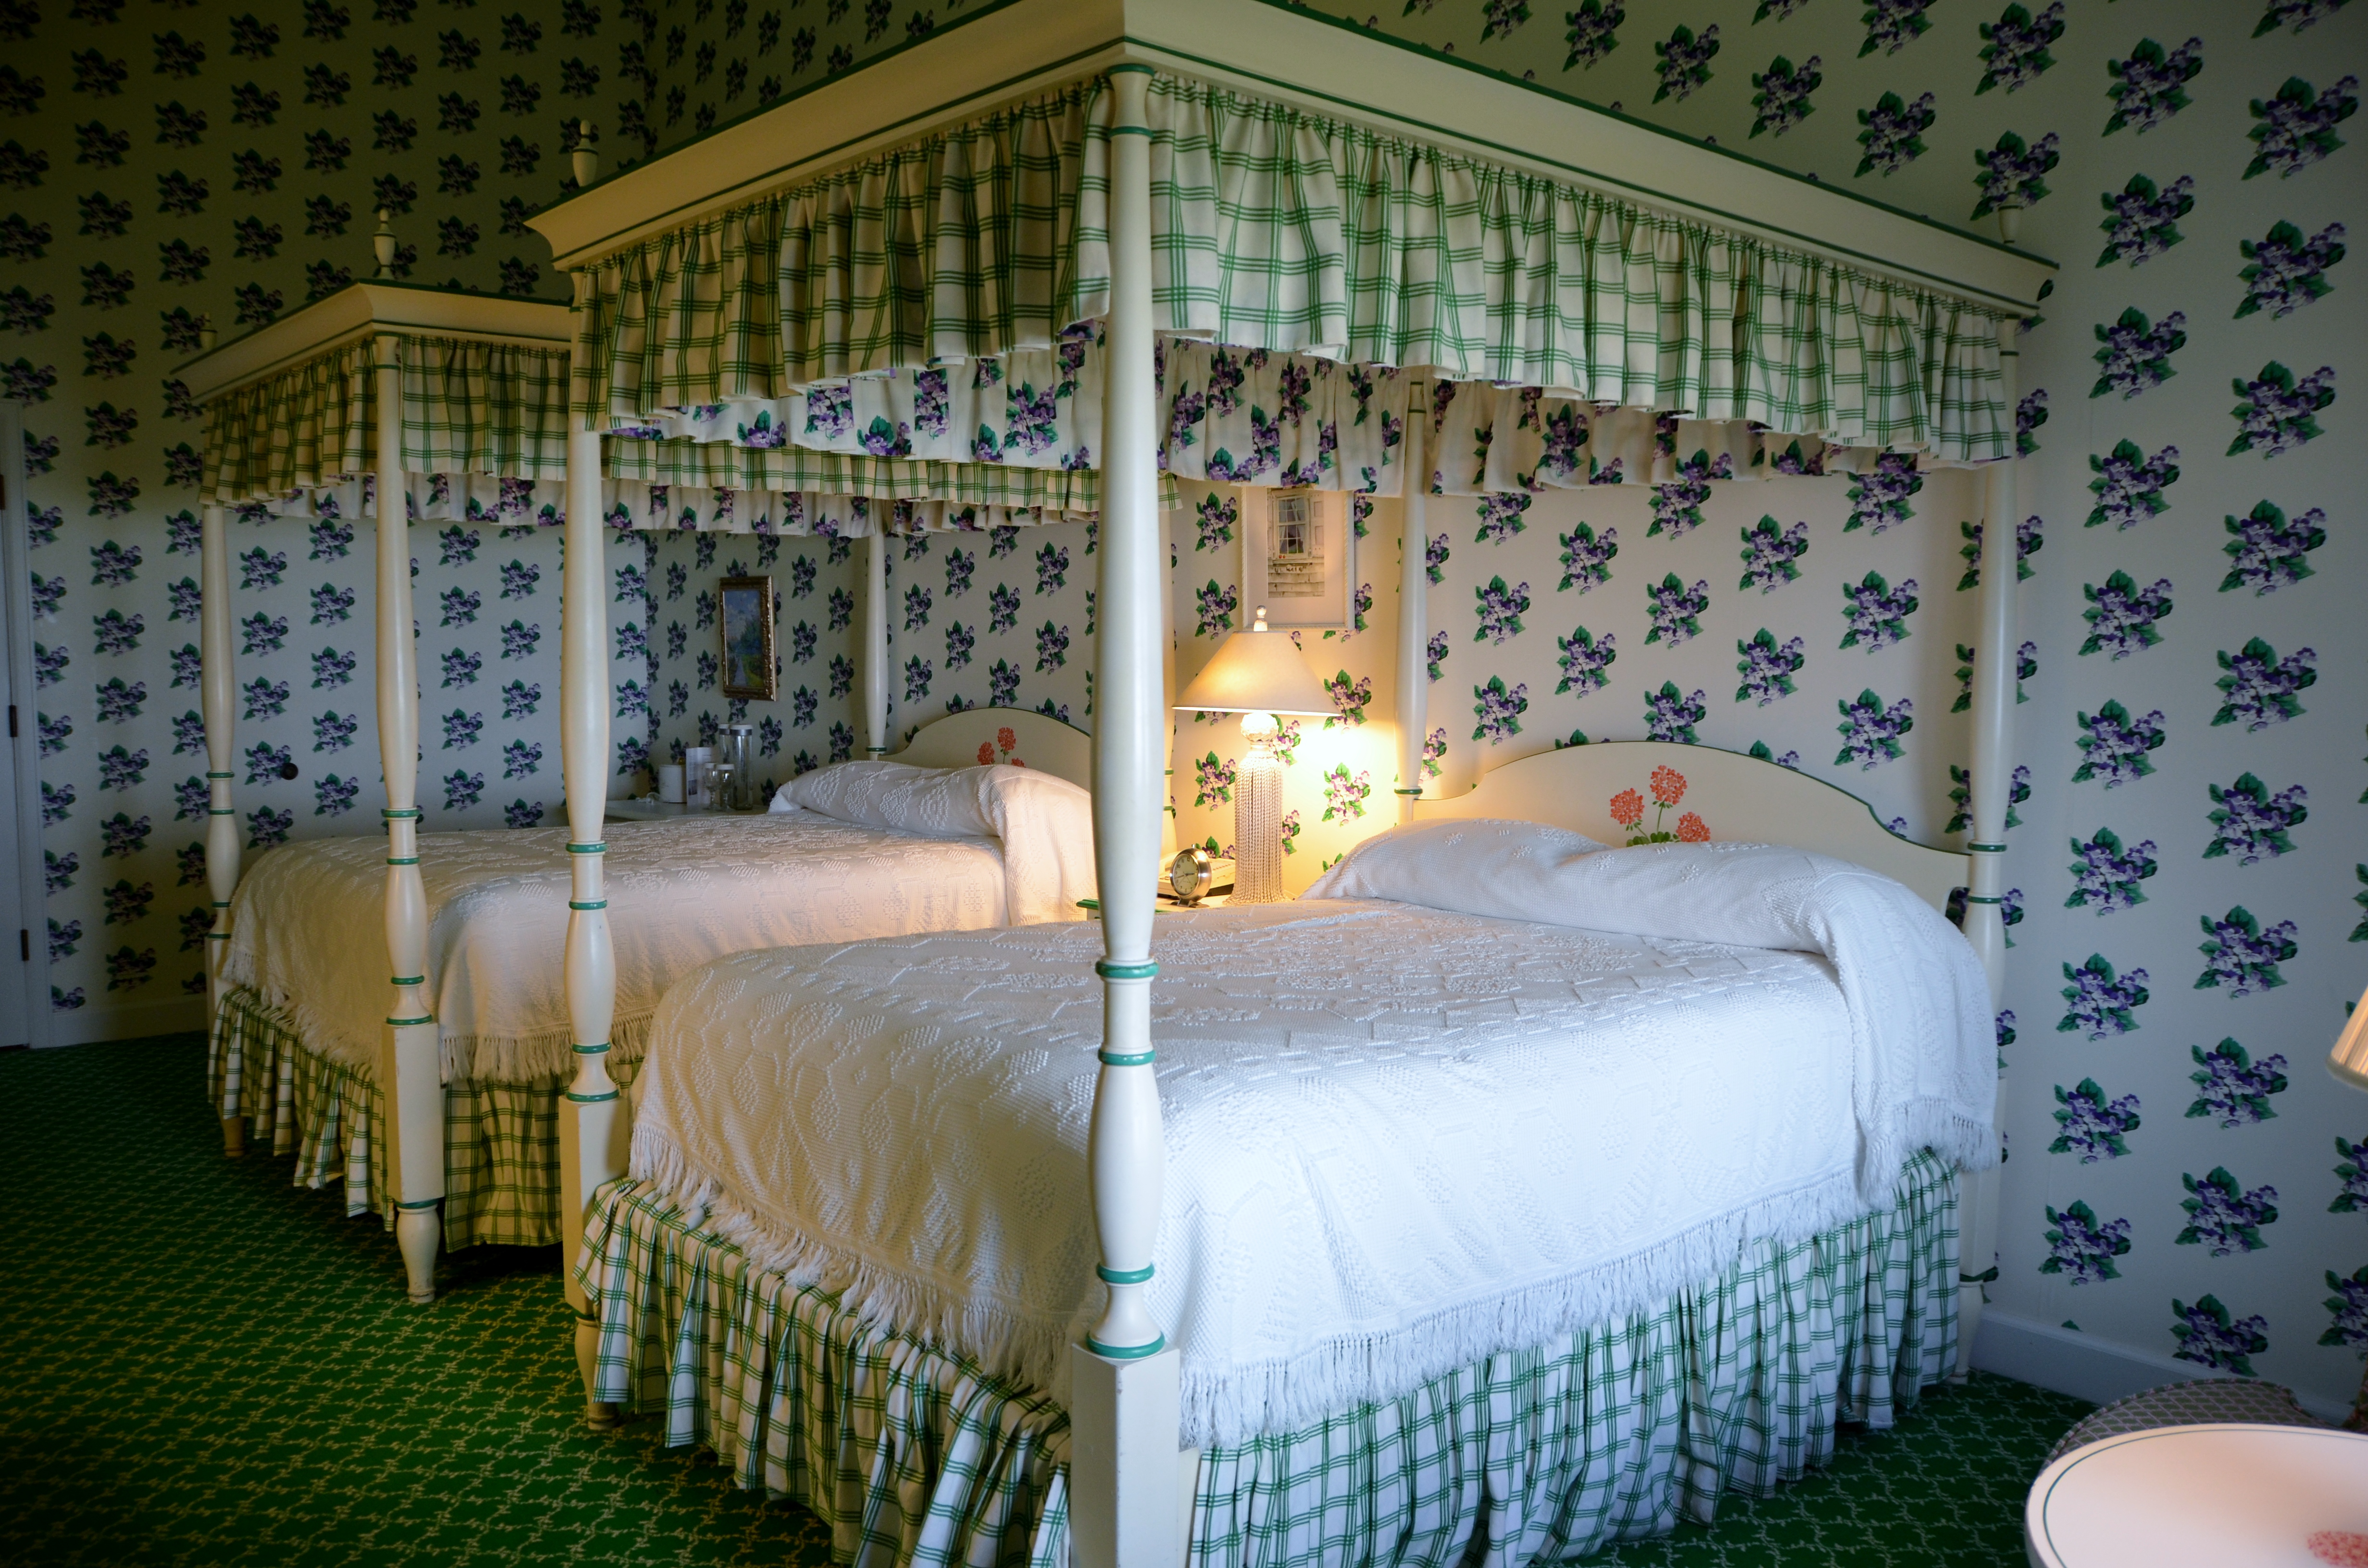 A guest Room at The Grand Hotel on Mackinac Island